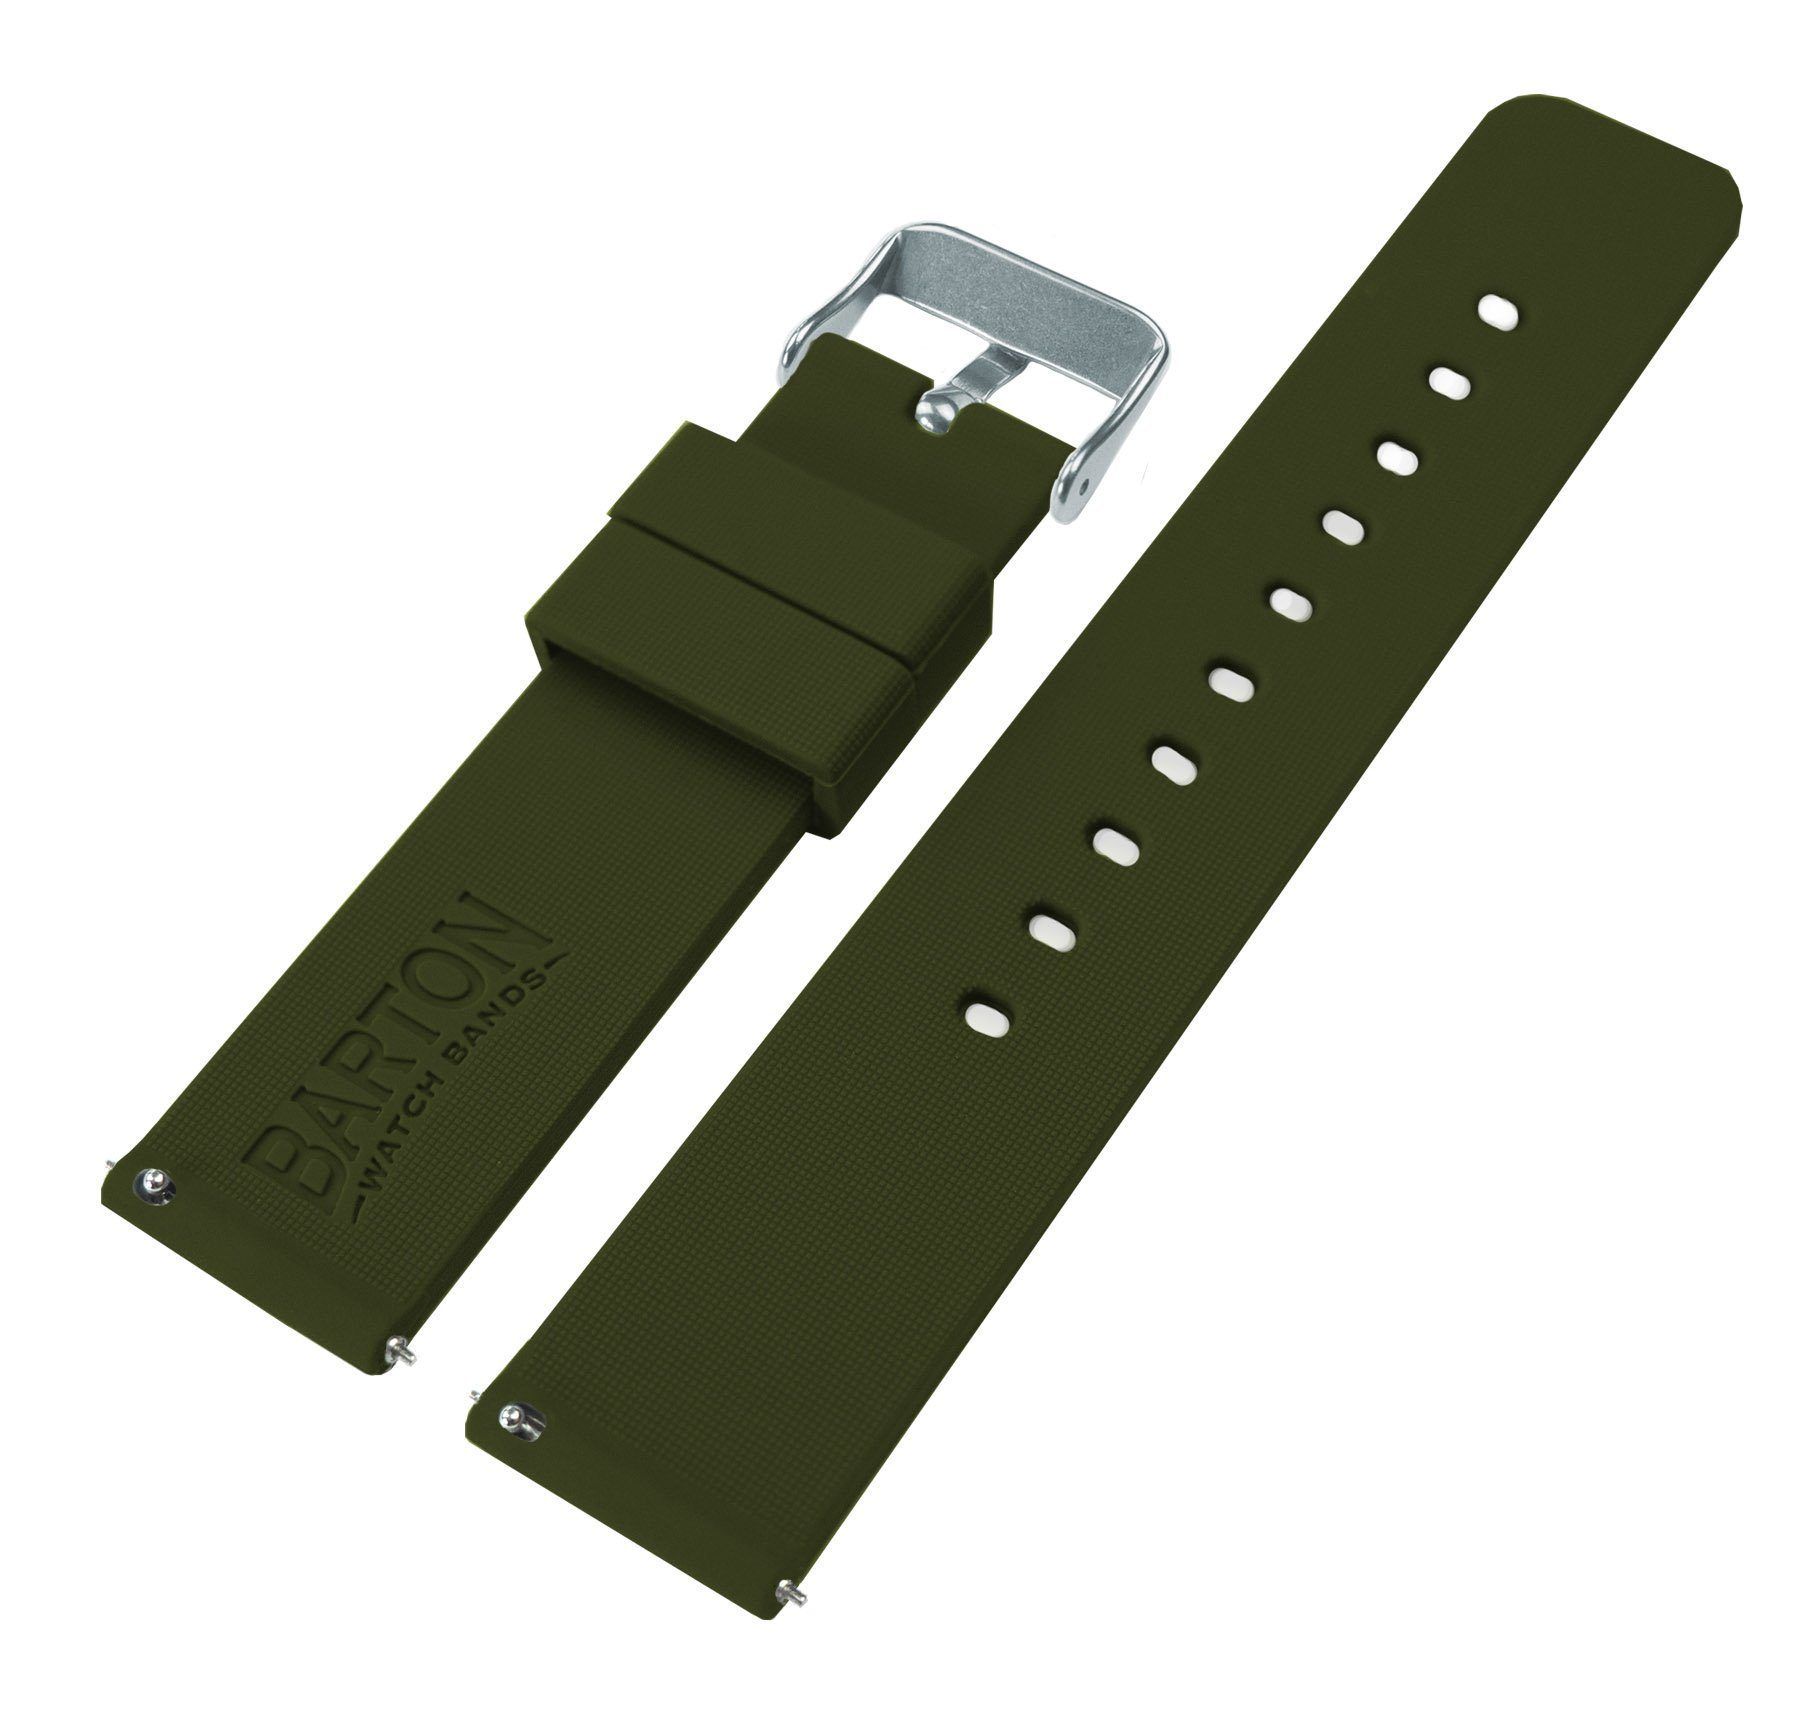 Pebble Smart Watches | Silicone | Army Green - Barton Watch Bands